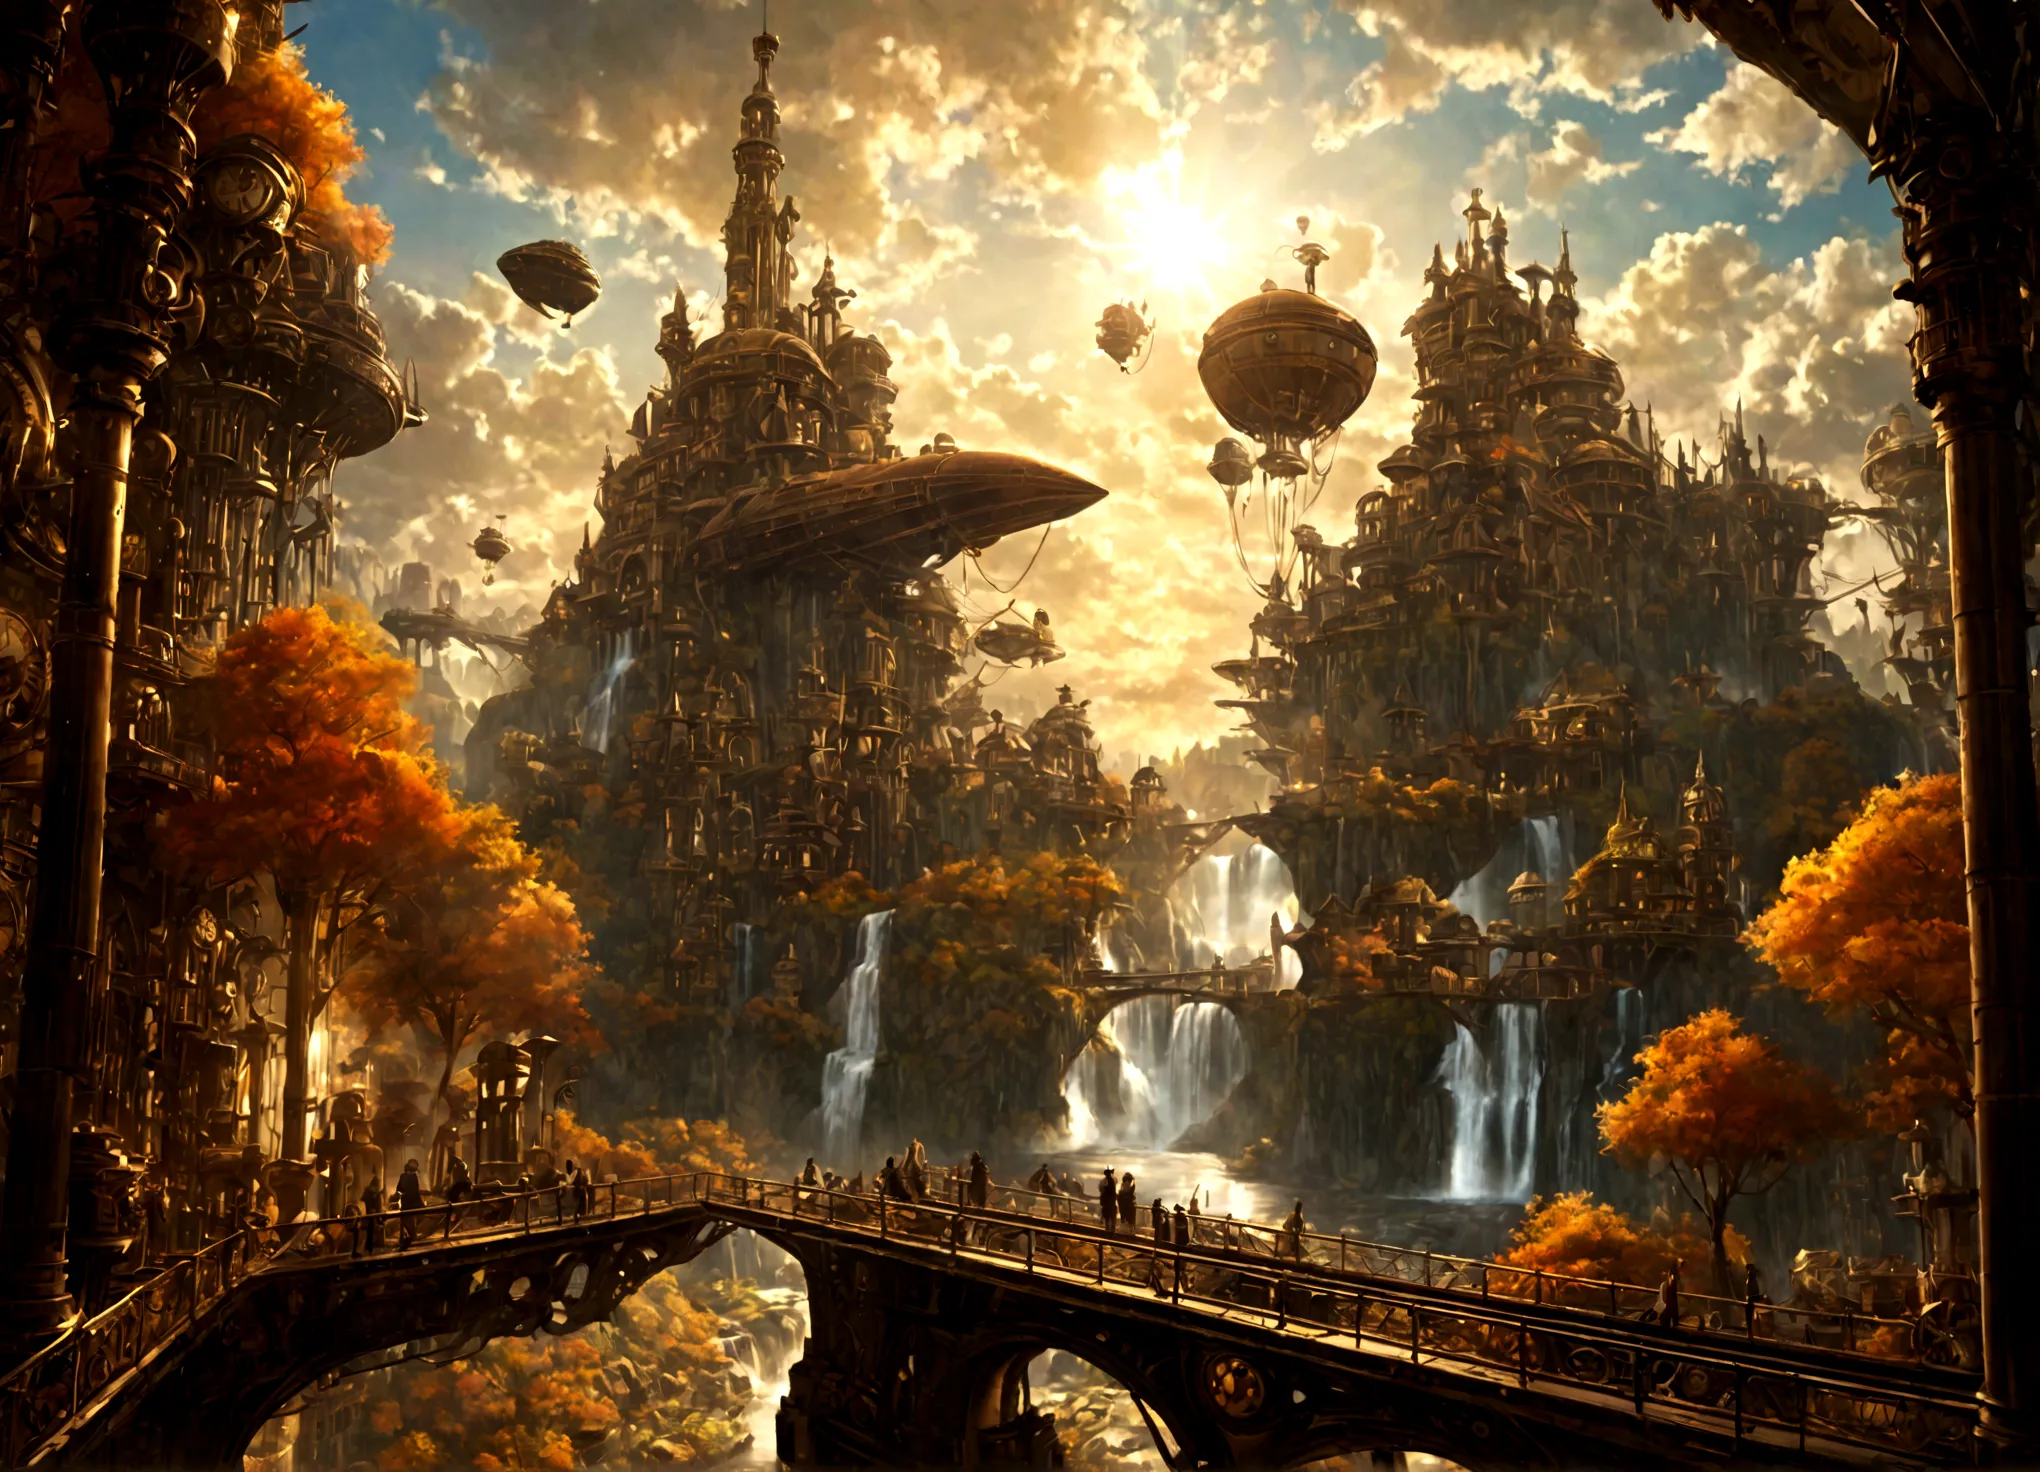 a beautiful steampunk clockwork city, small airships, floating islands, waterfalls, autumn themed forest, detailed architecture,...